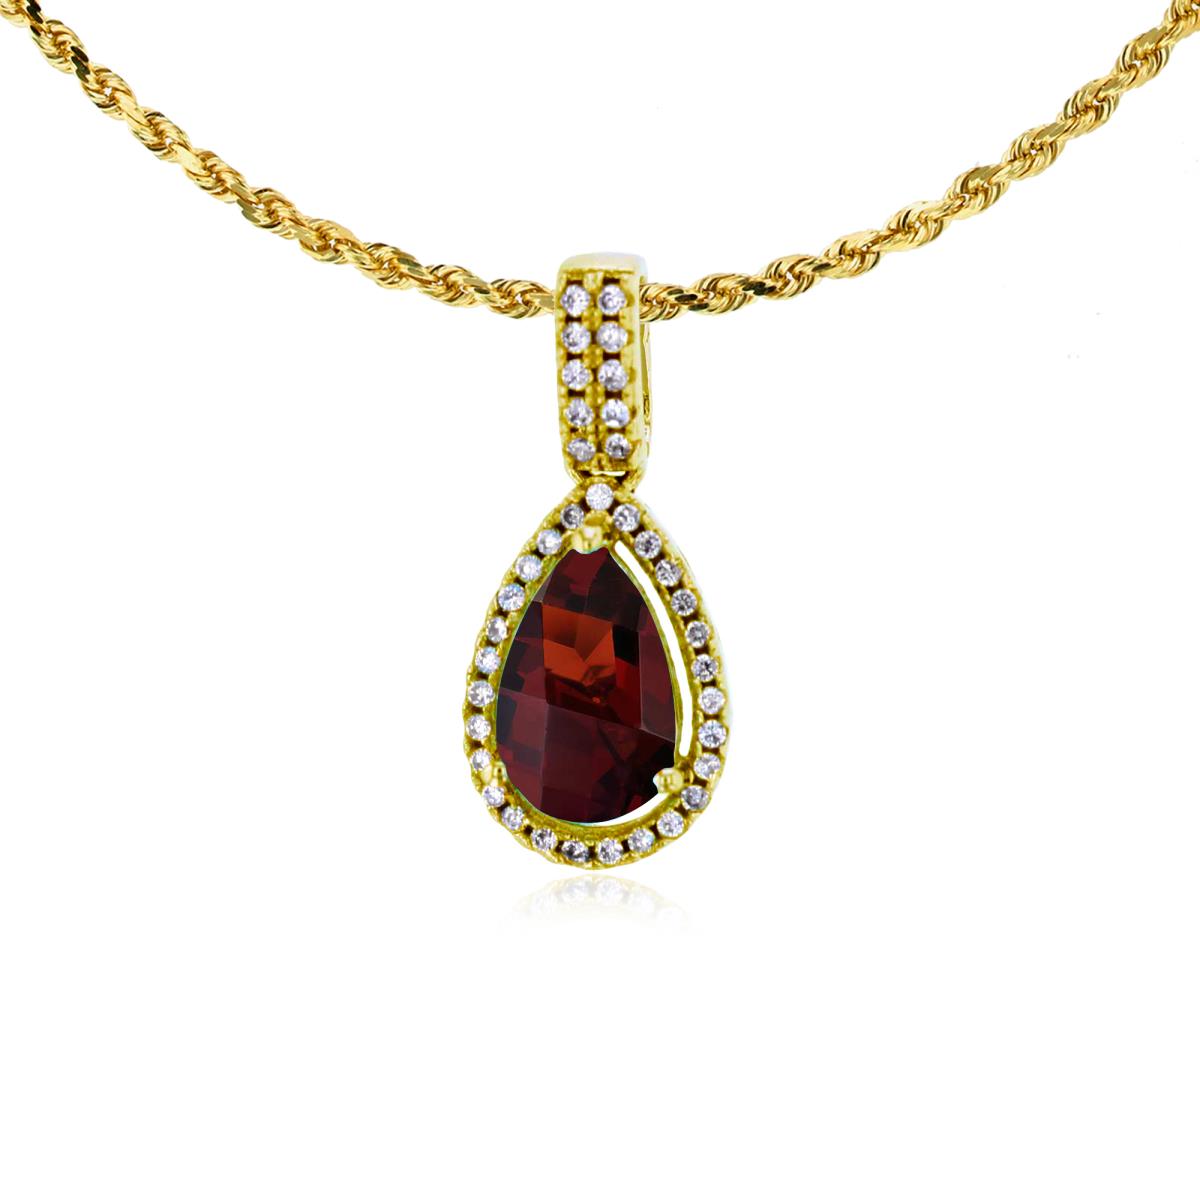 10K Yellow Gold 8x5mm Pear Cut Garnet & 0.11 CTTW Diamond Halo 18" Rope Chain Necklace